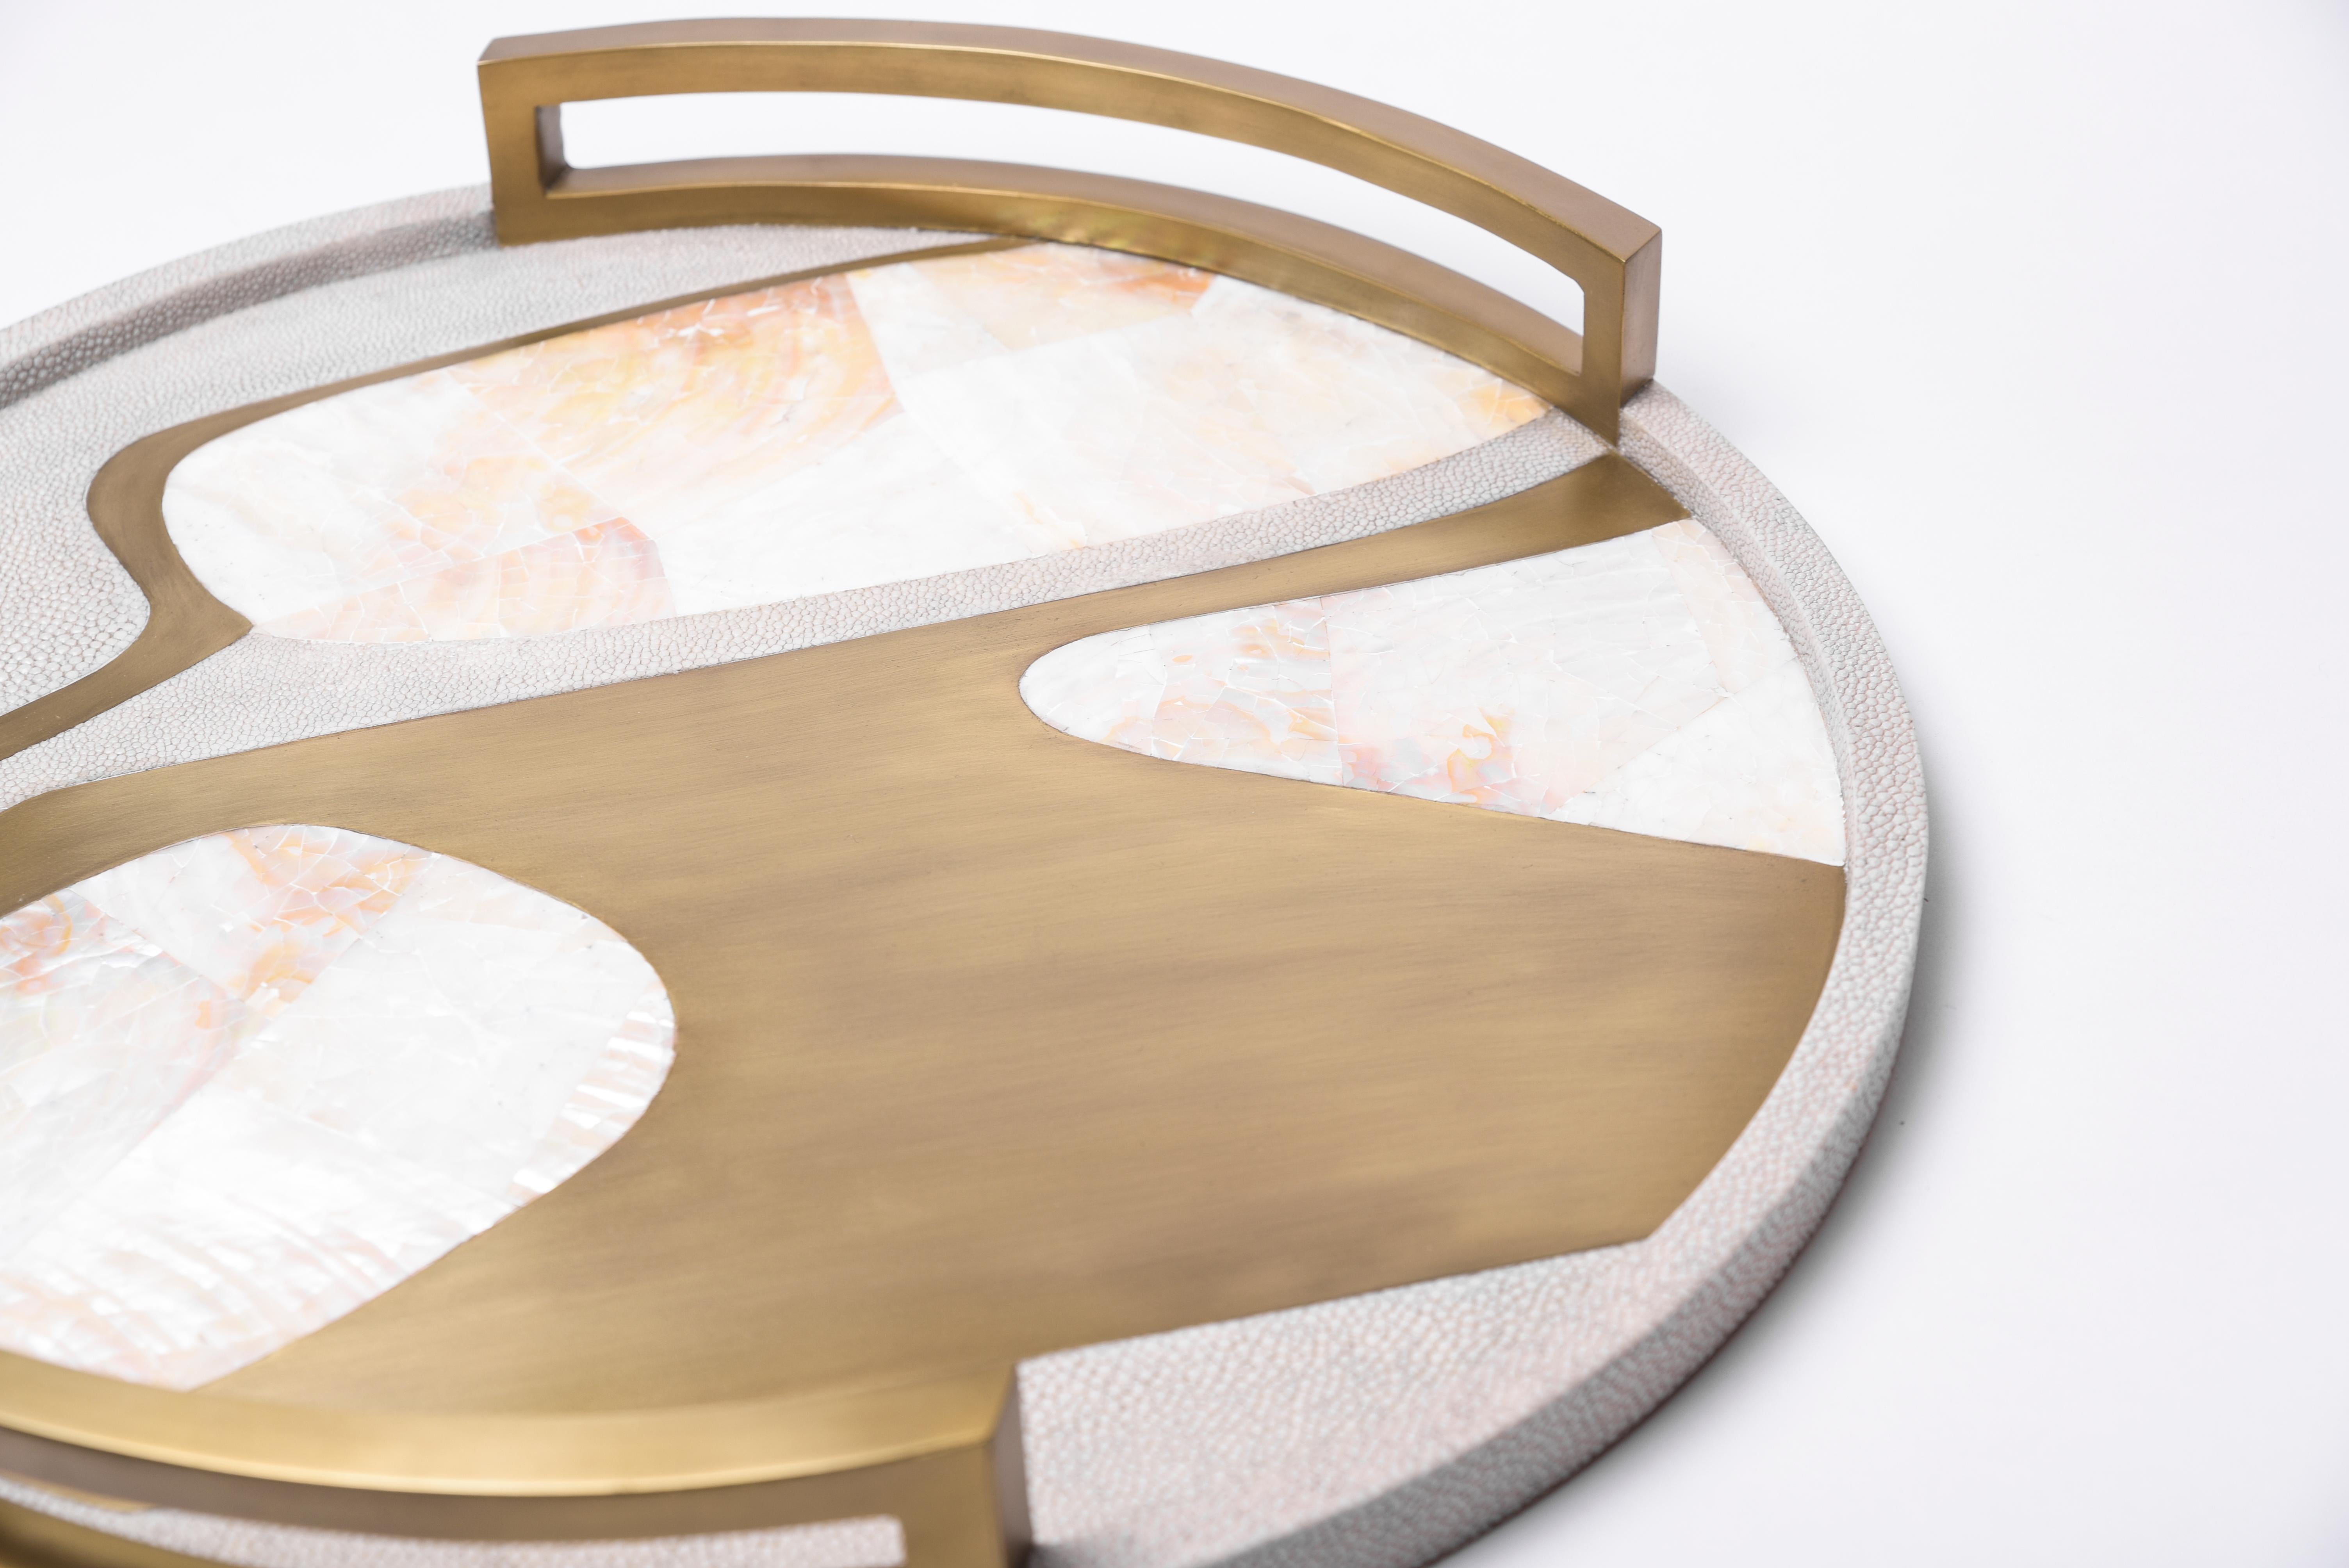 The Cosmos circular tray is a stunning tabletop piece for any space. Available in light or dark color way inlaid in a mixture of shagreen, pen shell and bronze-patina brass.

· Measures: 48.5 diameter x 6.3 cm

All R & Y Augousti pieces are